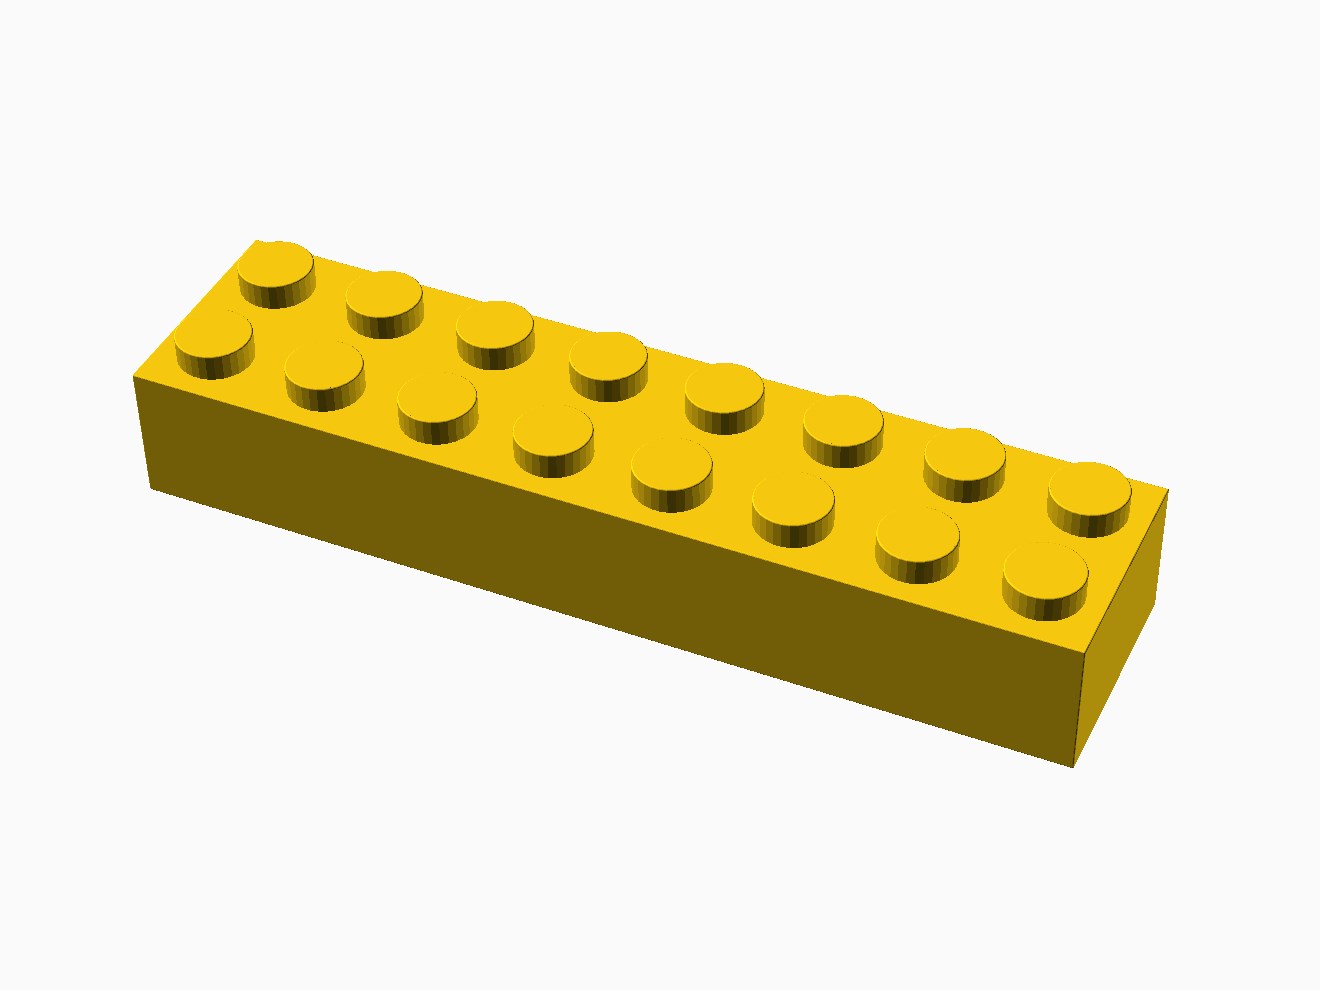 3D printable model of a LEGO 8x2 Brick with standard knobs.